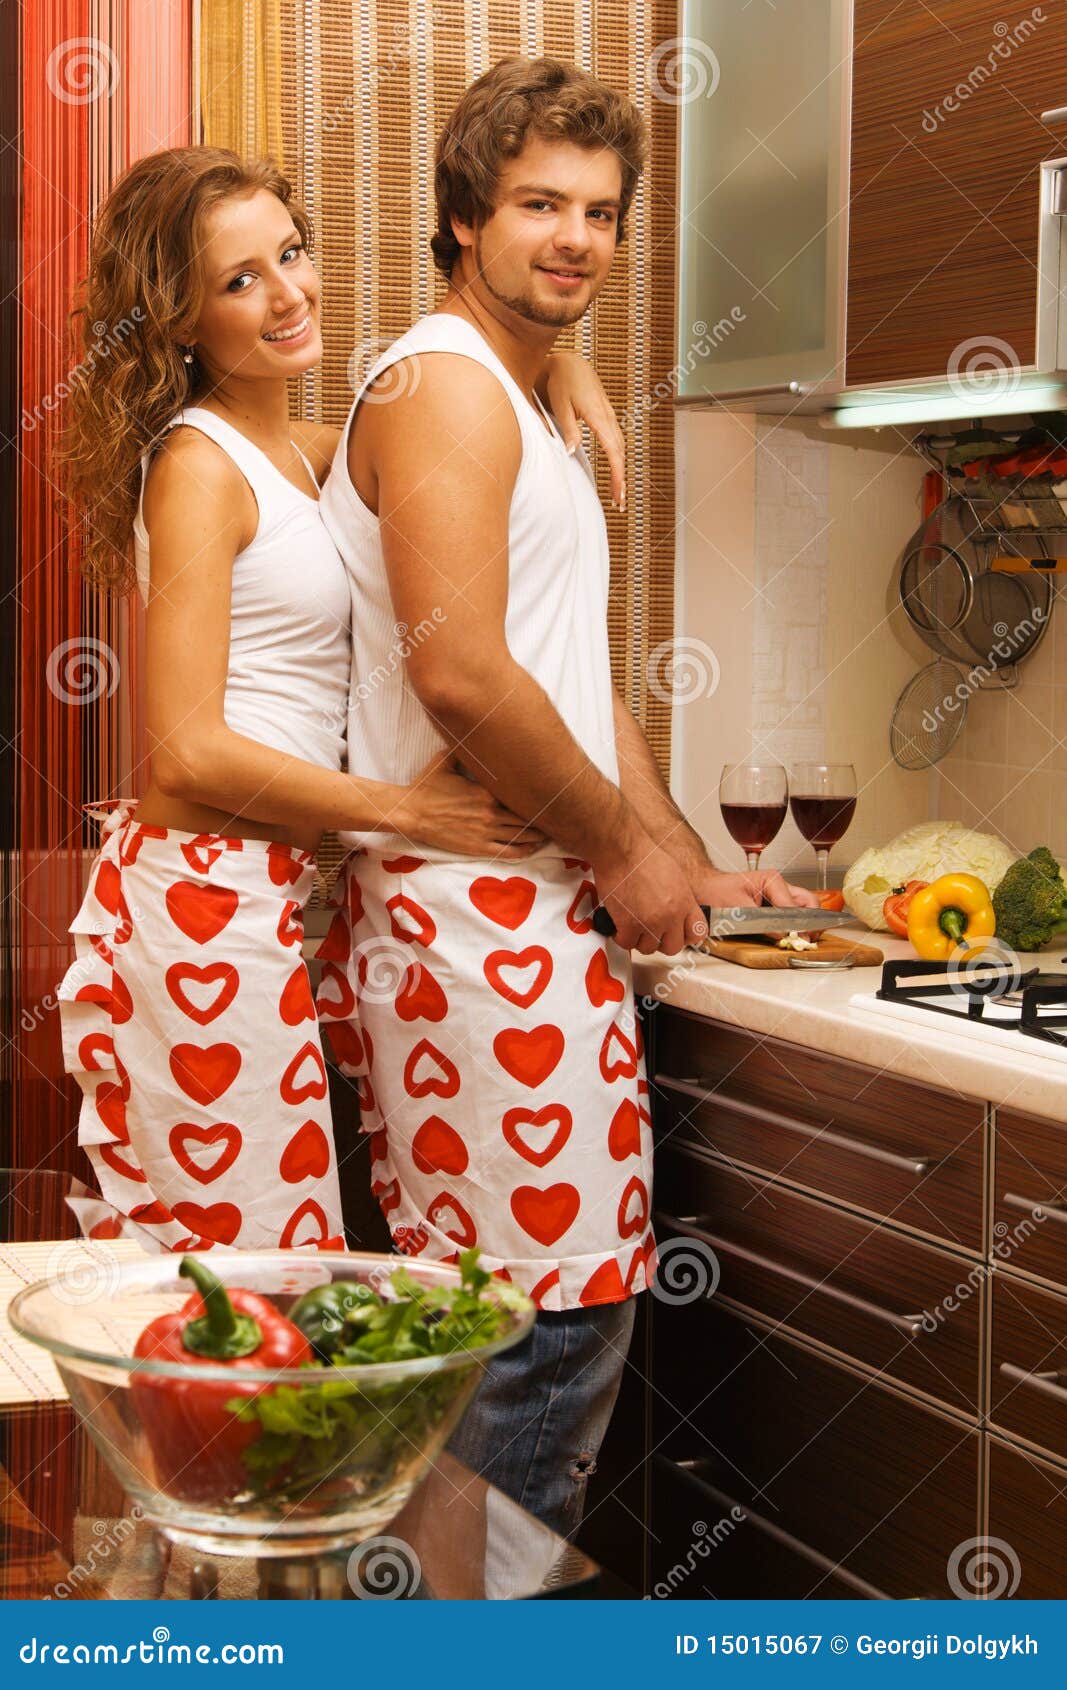 Young Romantic Couple Kitchen 15015067 